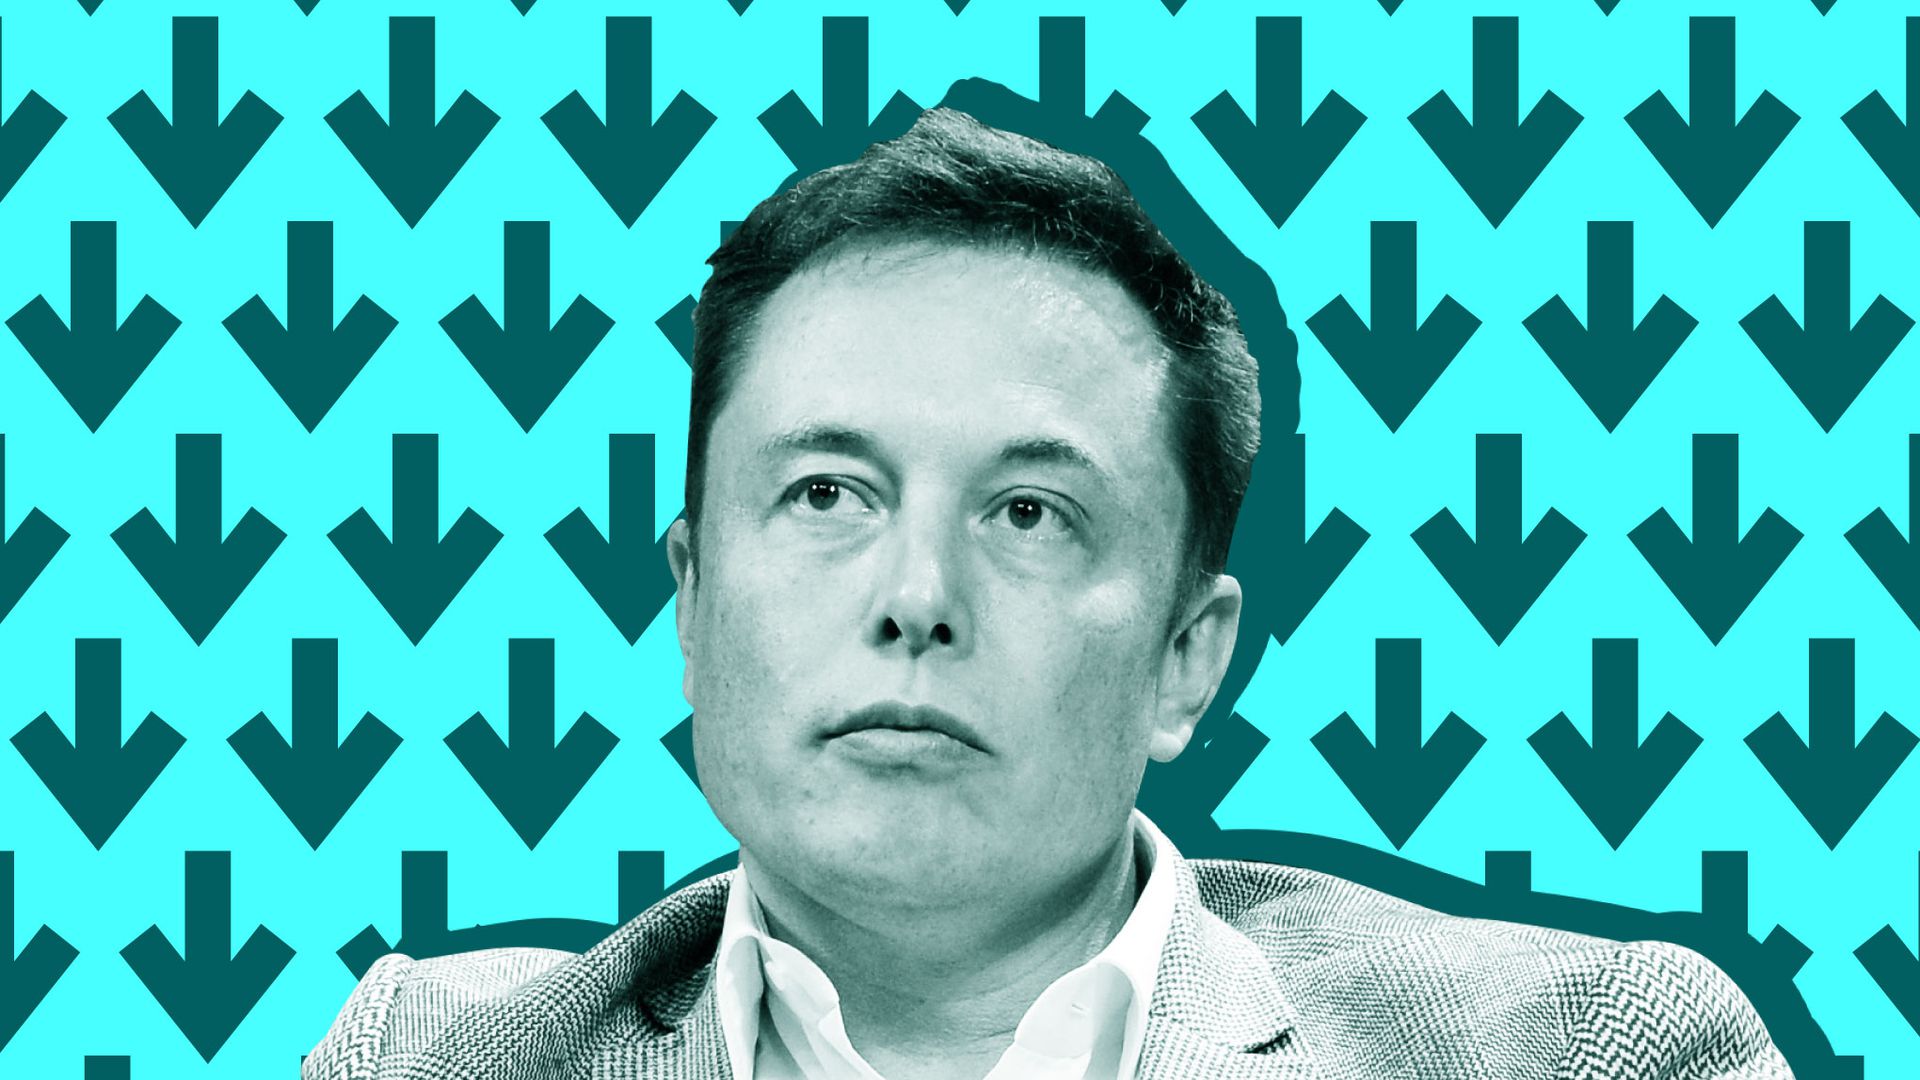 elon musk’s x can’t get around california’s content moderation law, judge rules